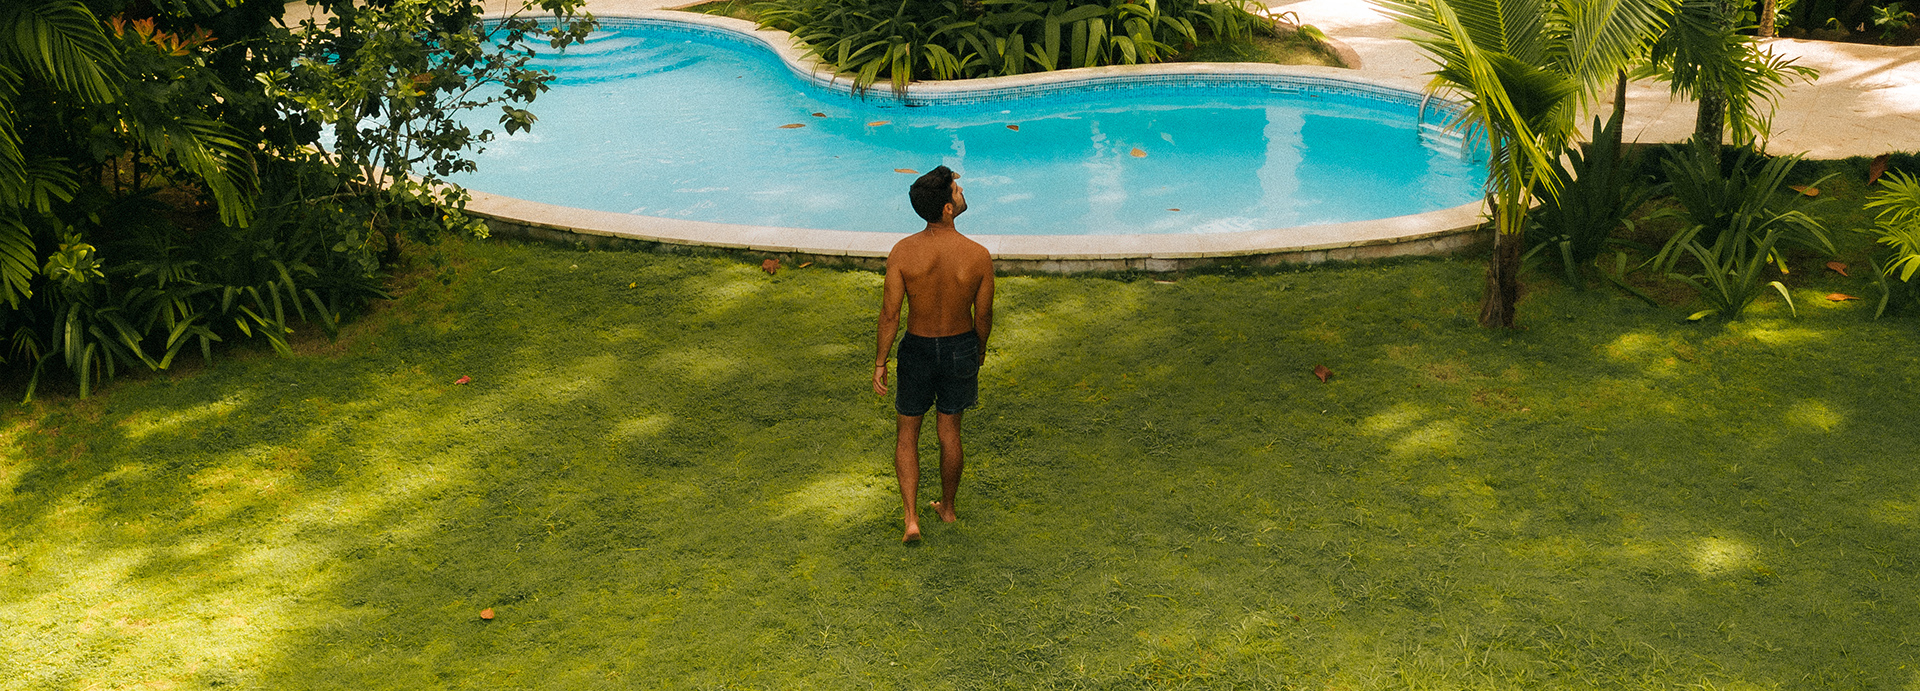 man walking in the grass by a pool